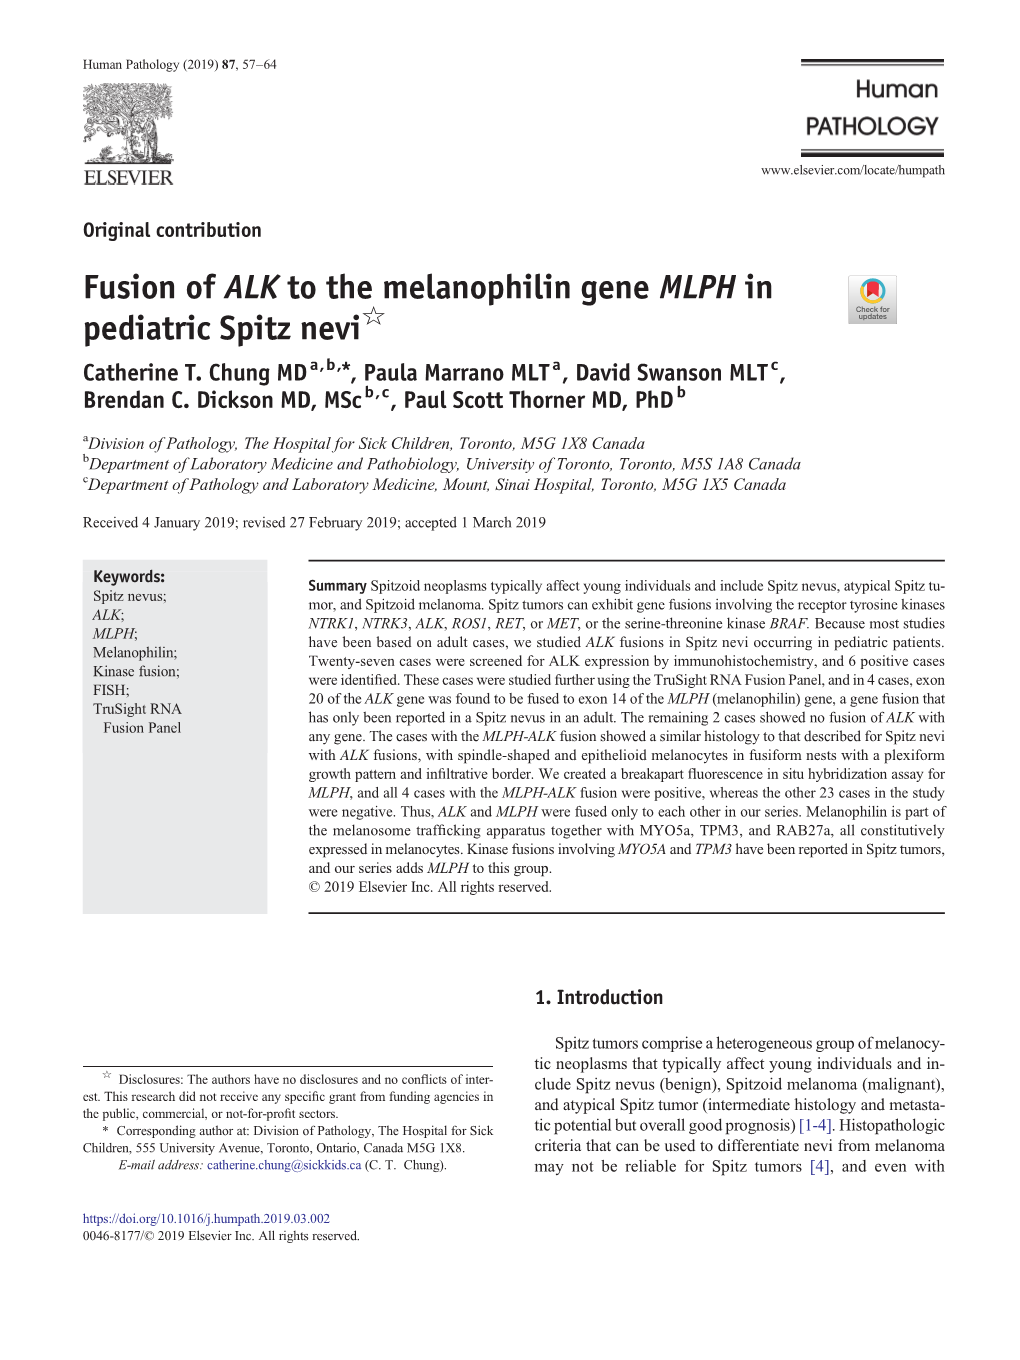 Fusion of ALK to the Melanophilin Gene MLPH in Pediatric Spitz Nevi☆ Catherine T